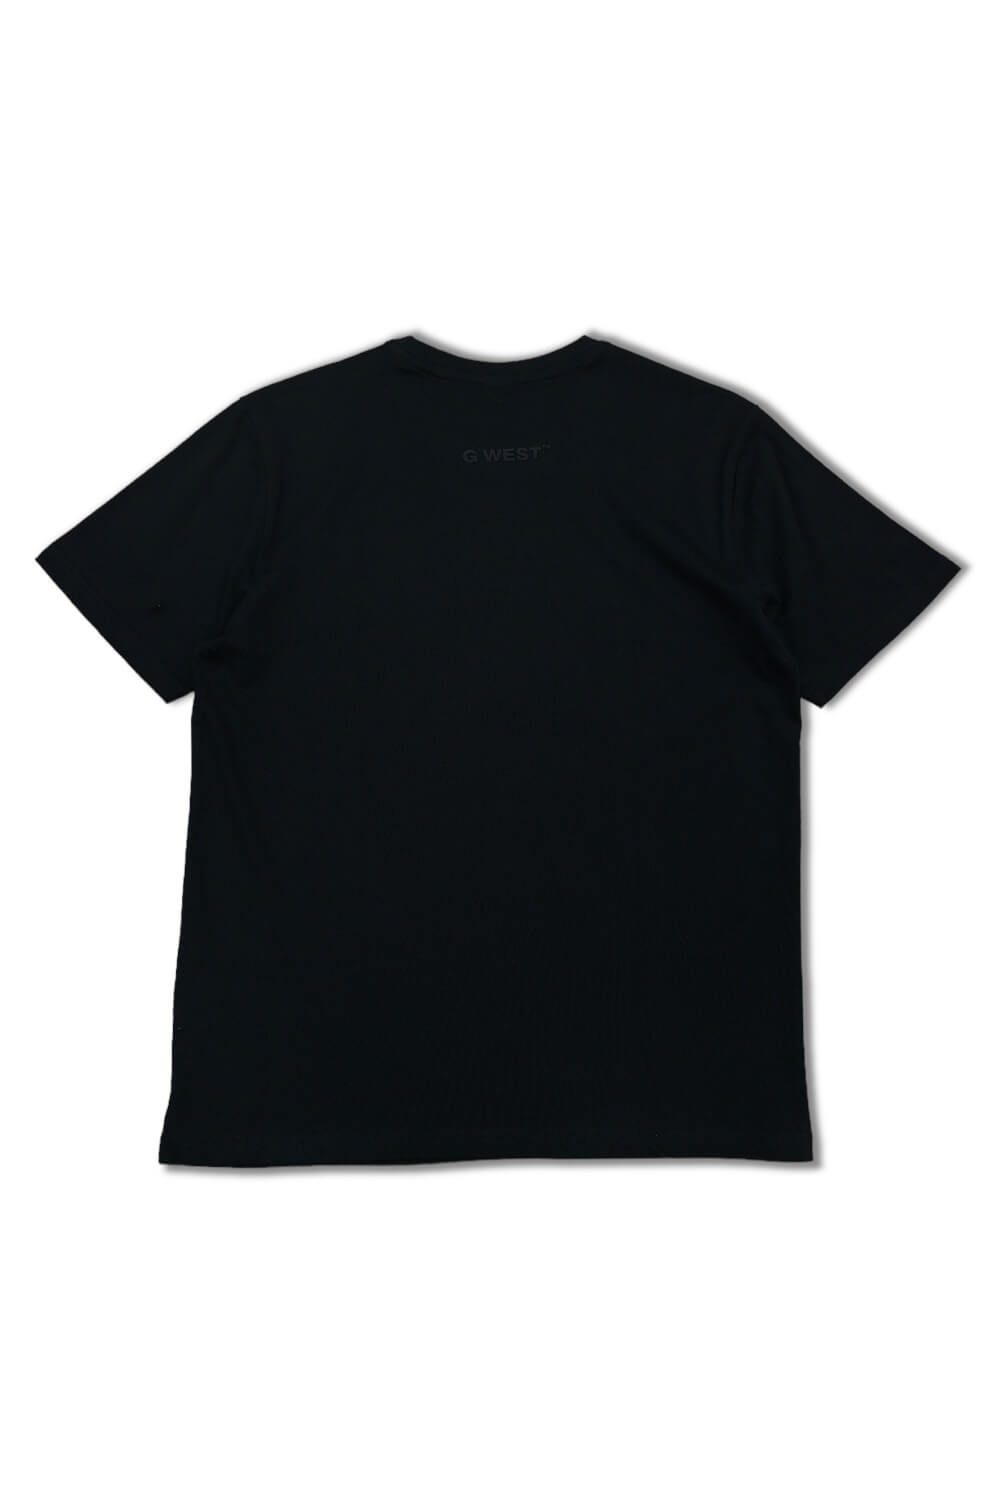 G West Speed Therapy T-shirt -Black